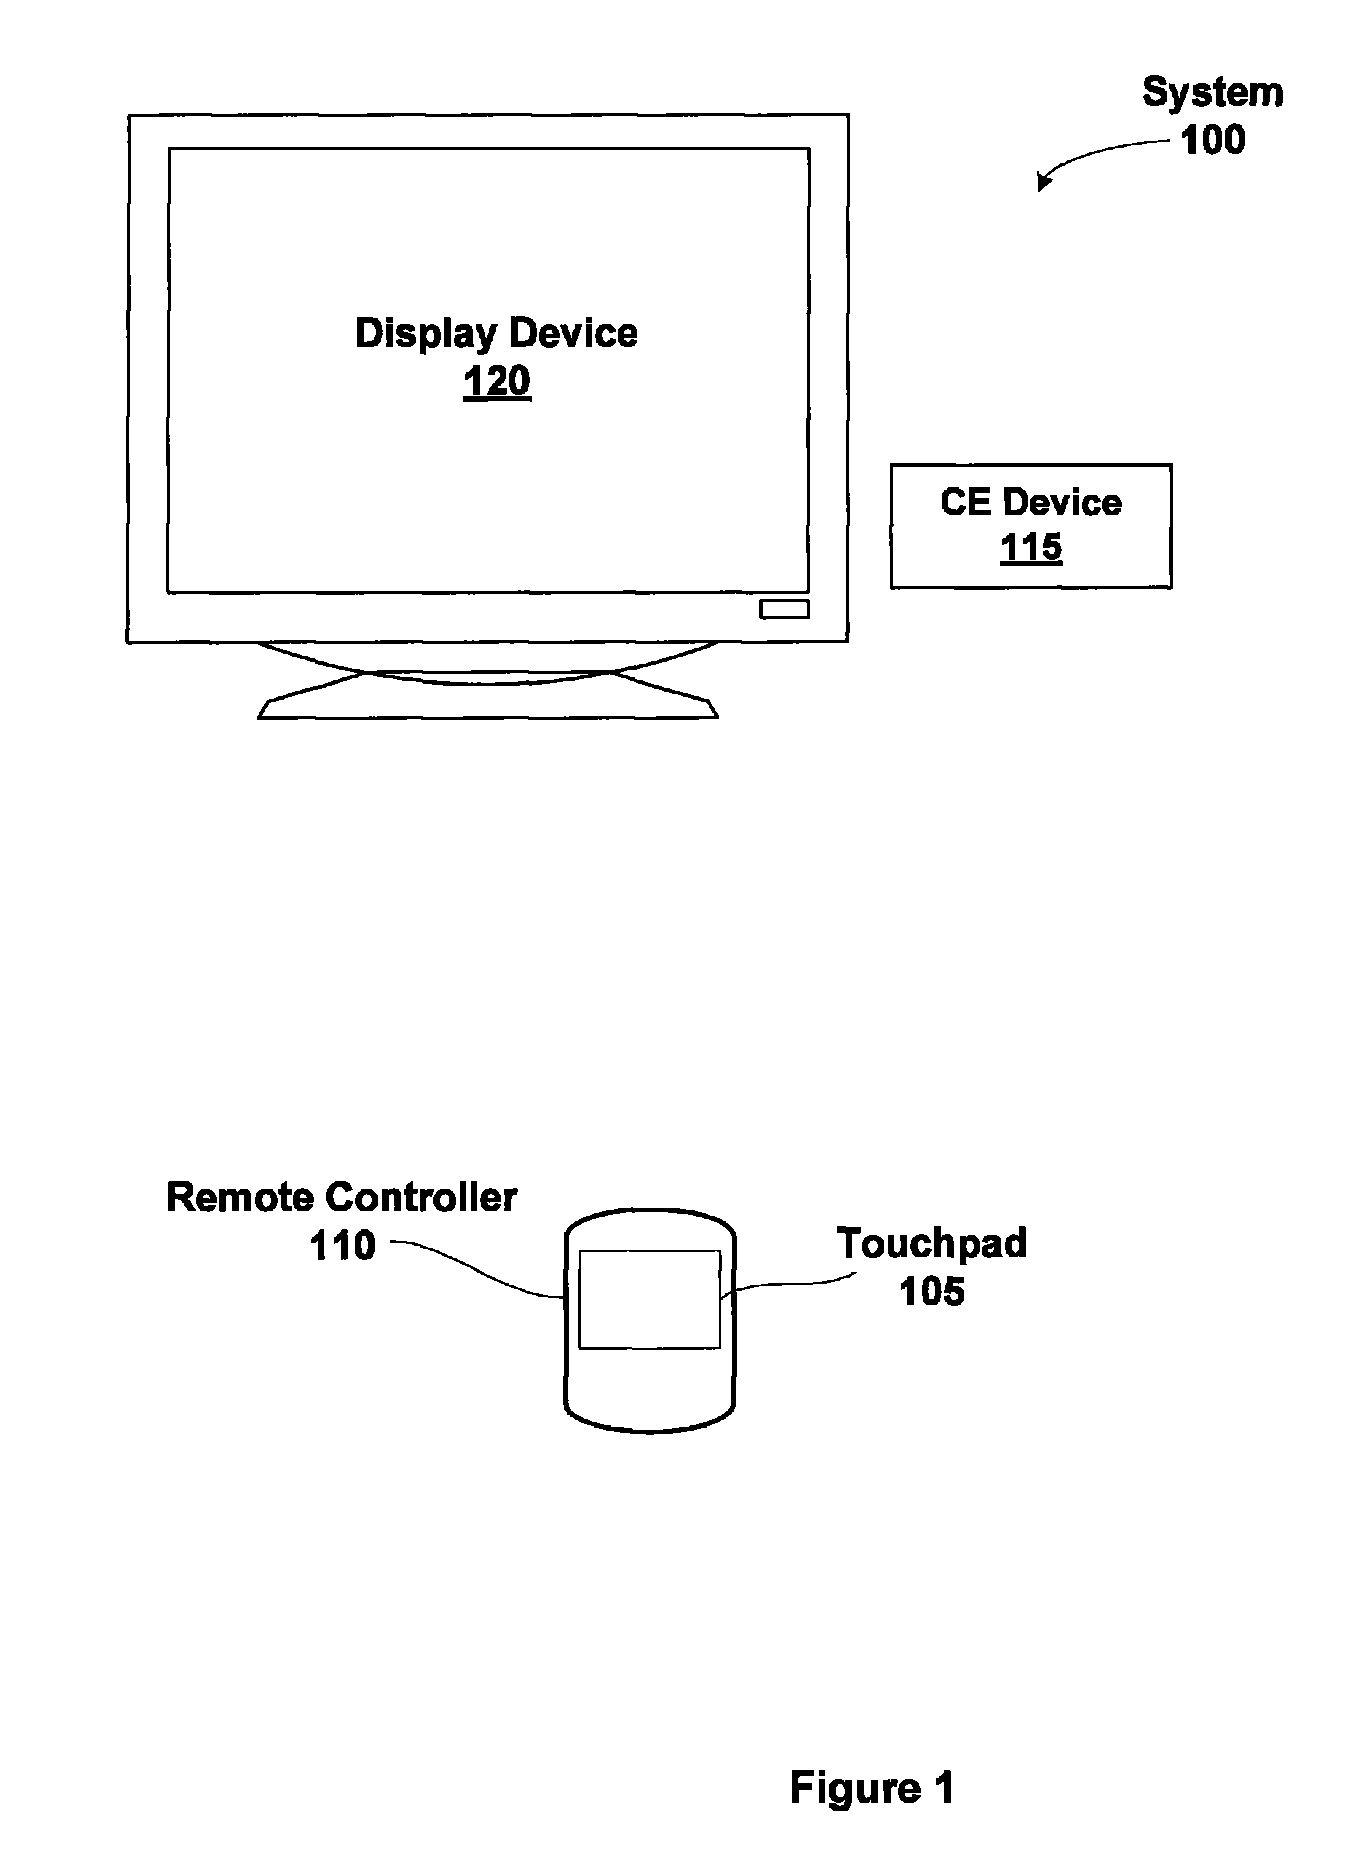 User interface for a remote control device